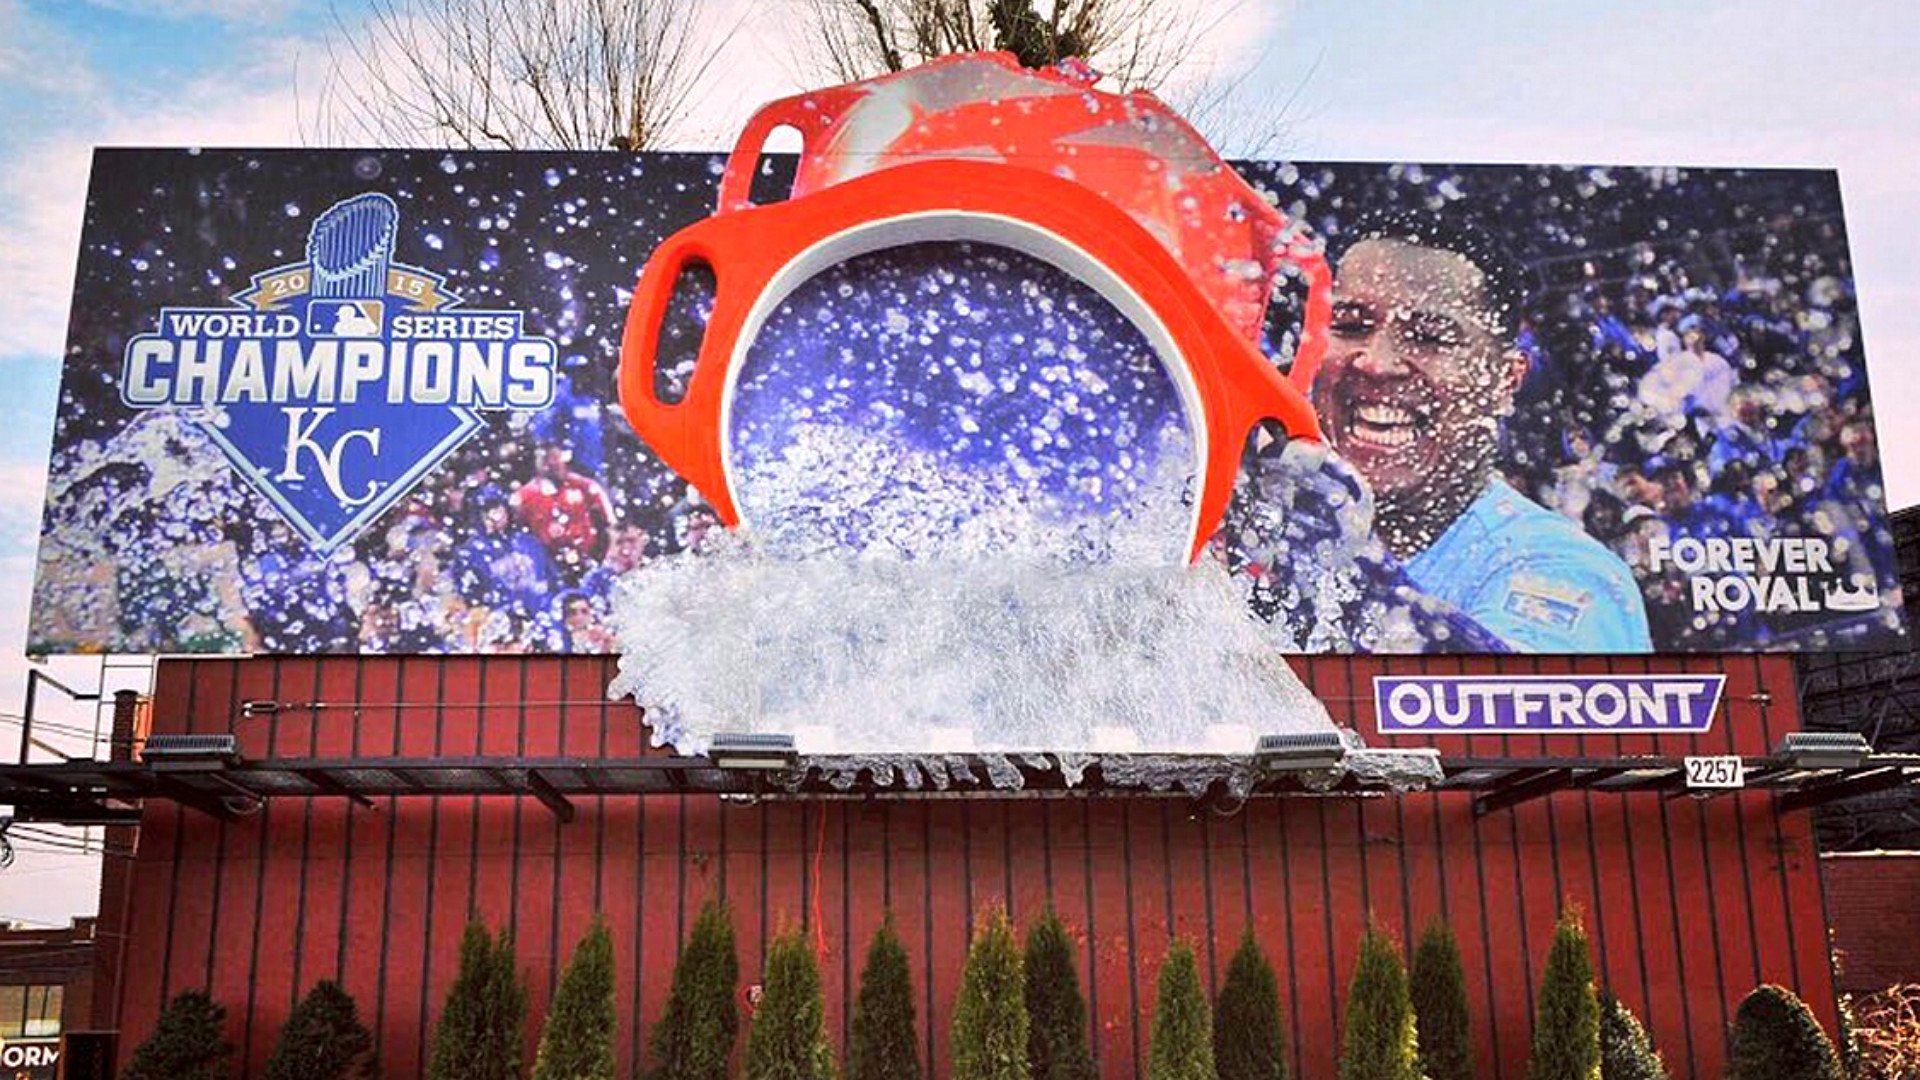 1920x1080 Salvador Perez gives fans a Gatorade shower in epic 3-D Royals billboard |  MLB | Sporting News